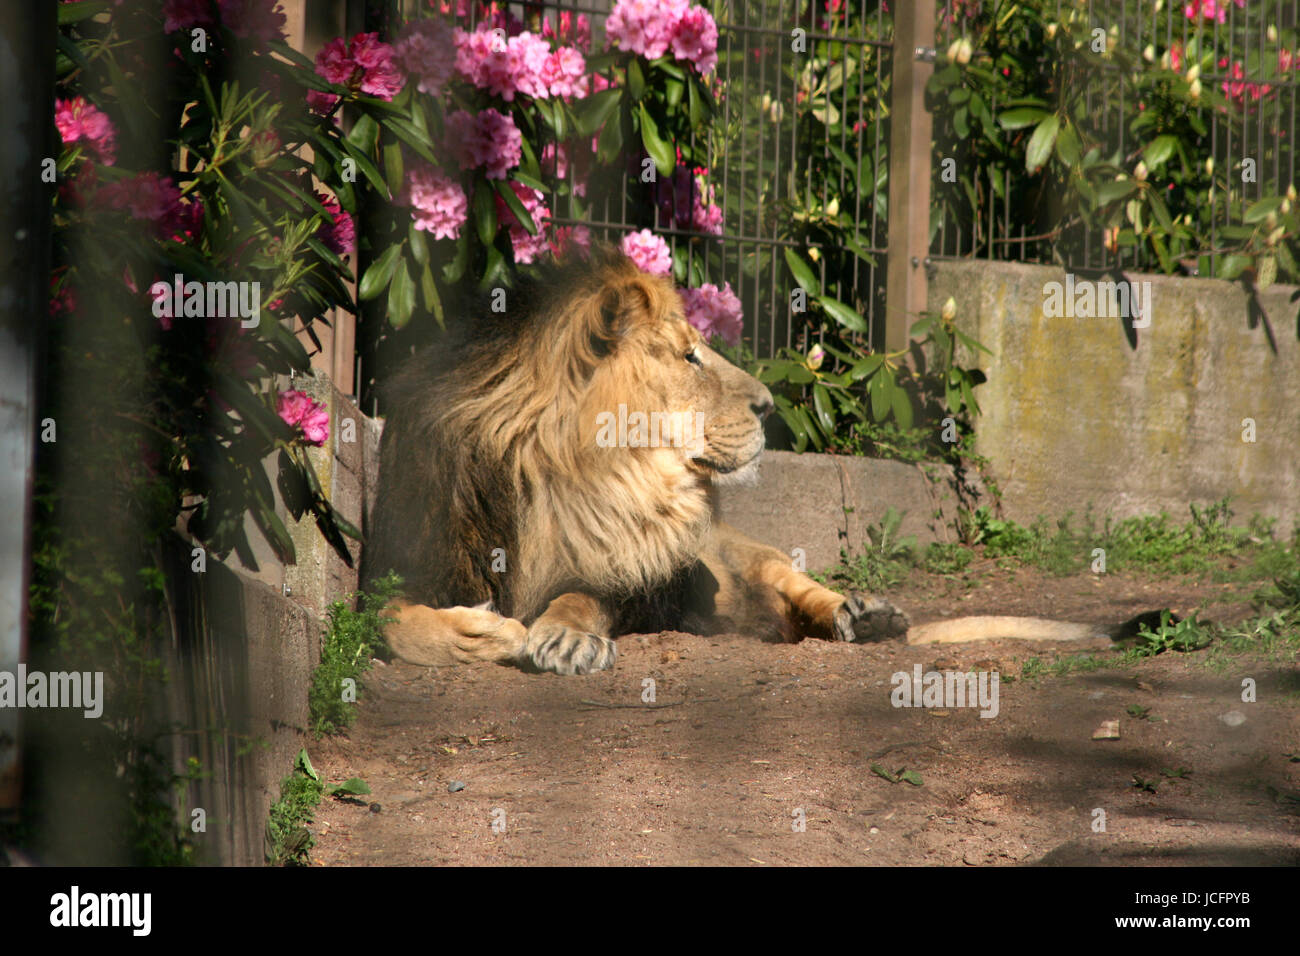 big cats - lions in a zoo - captured Stock Photo